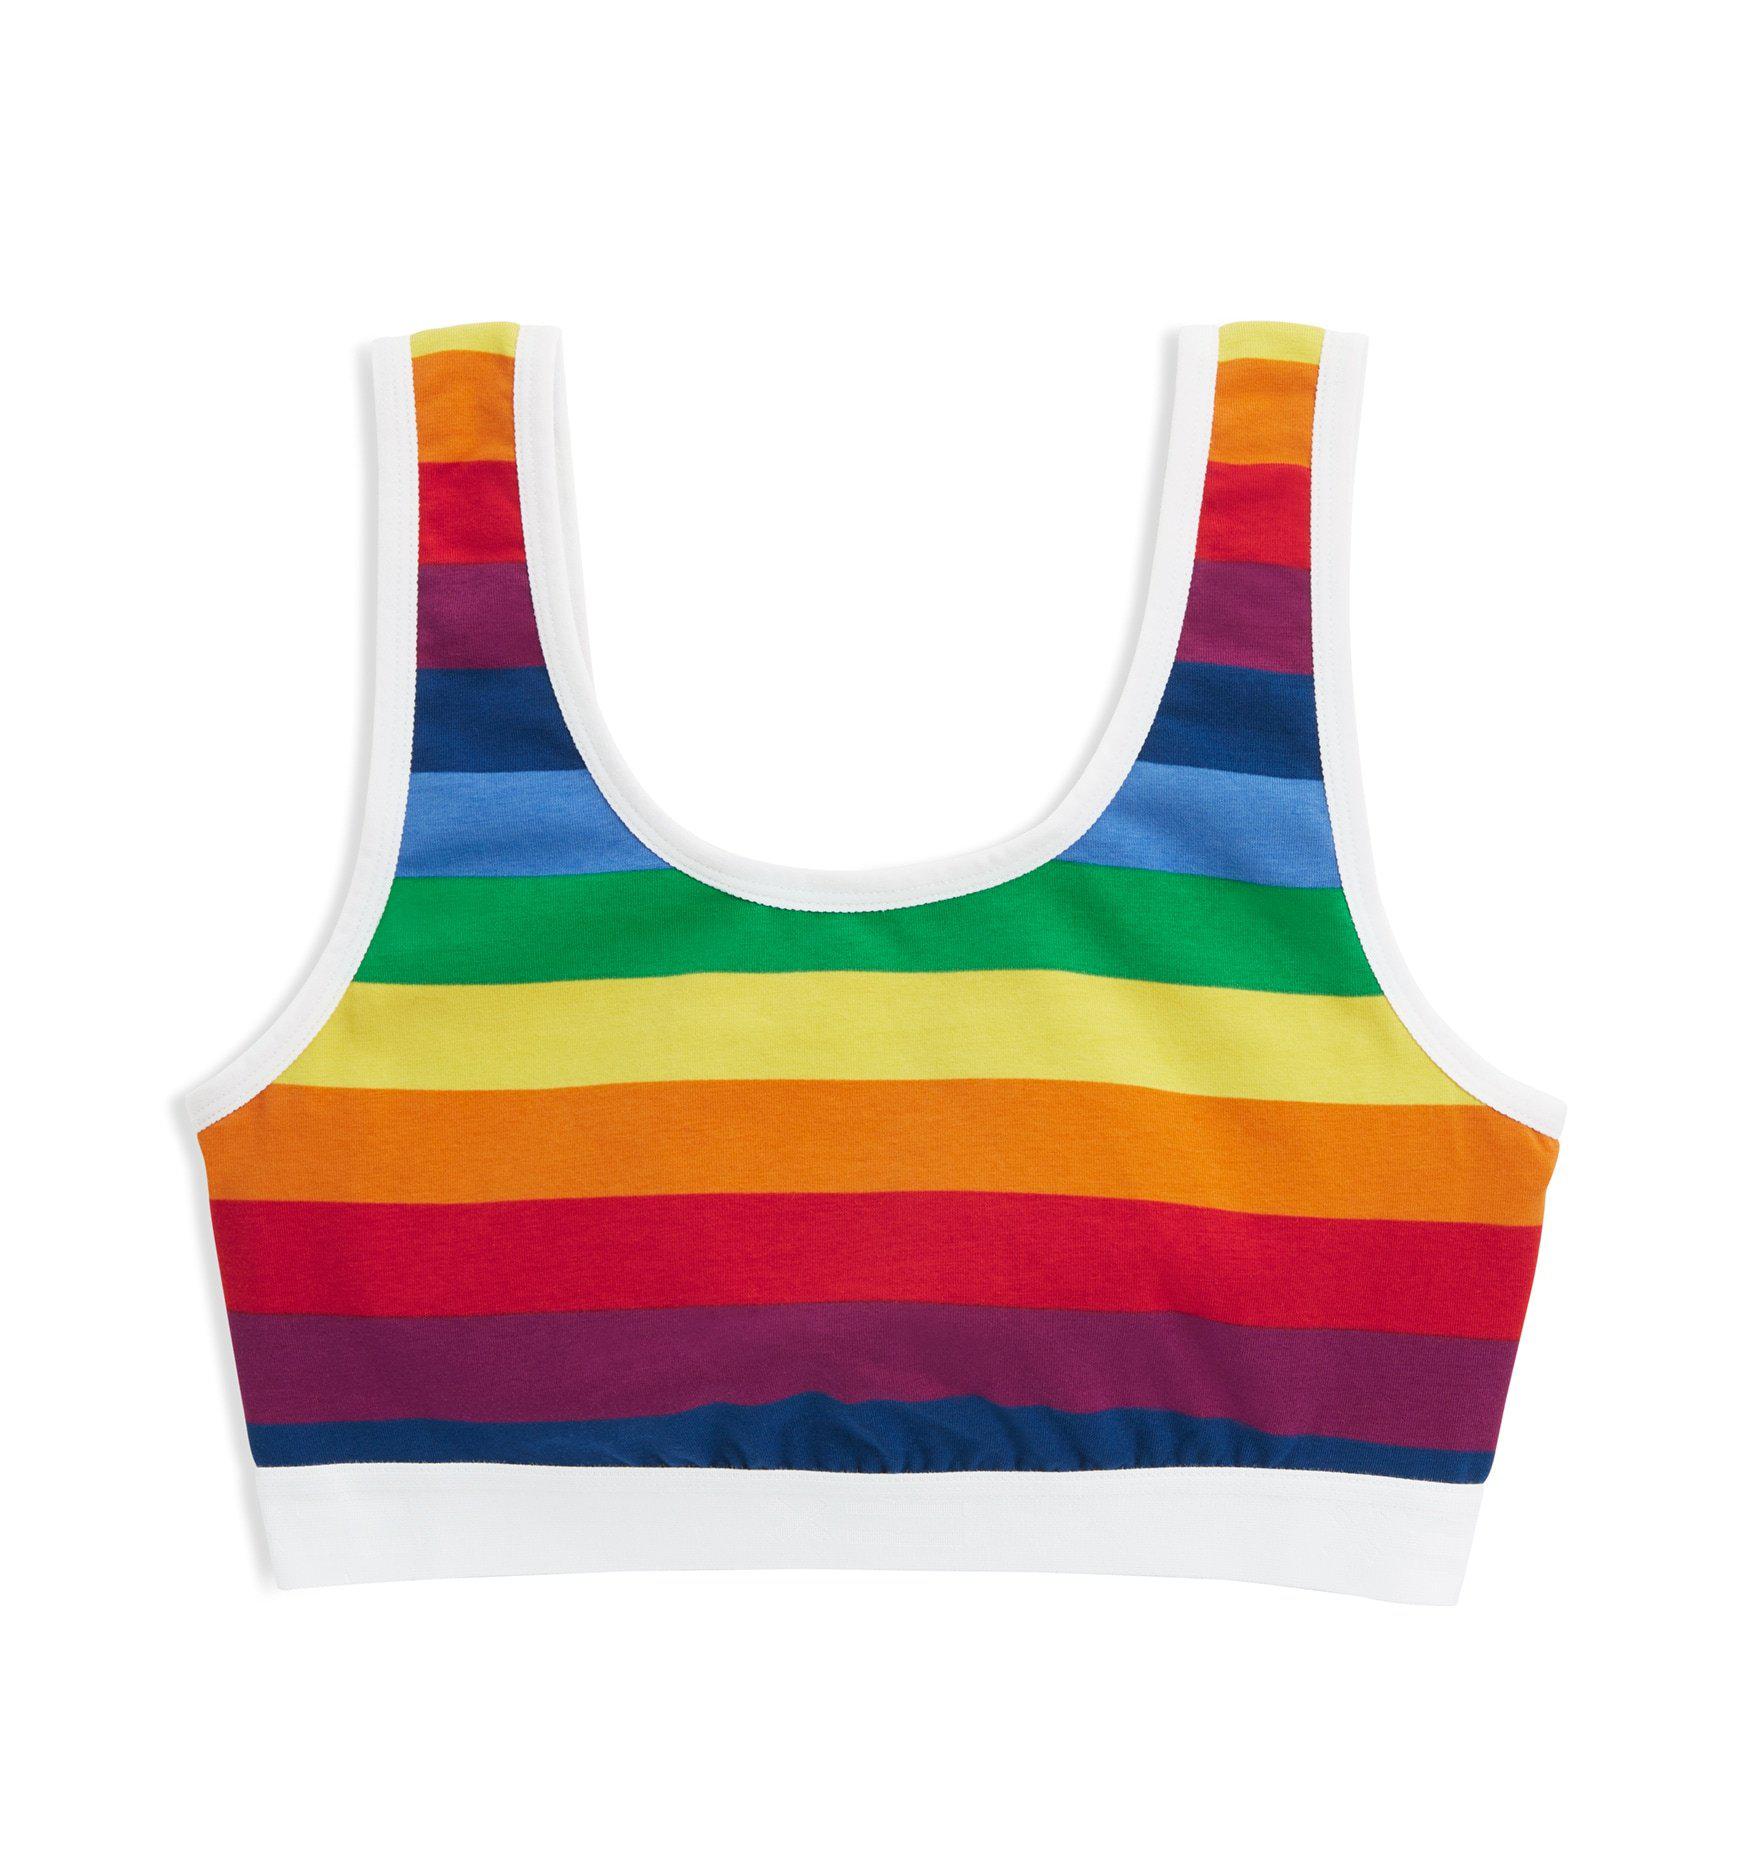 LGBTQ Pride Padded Supportive Sports Bra, Workout, Fitness